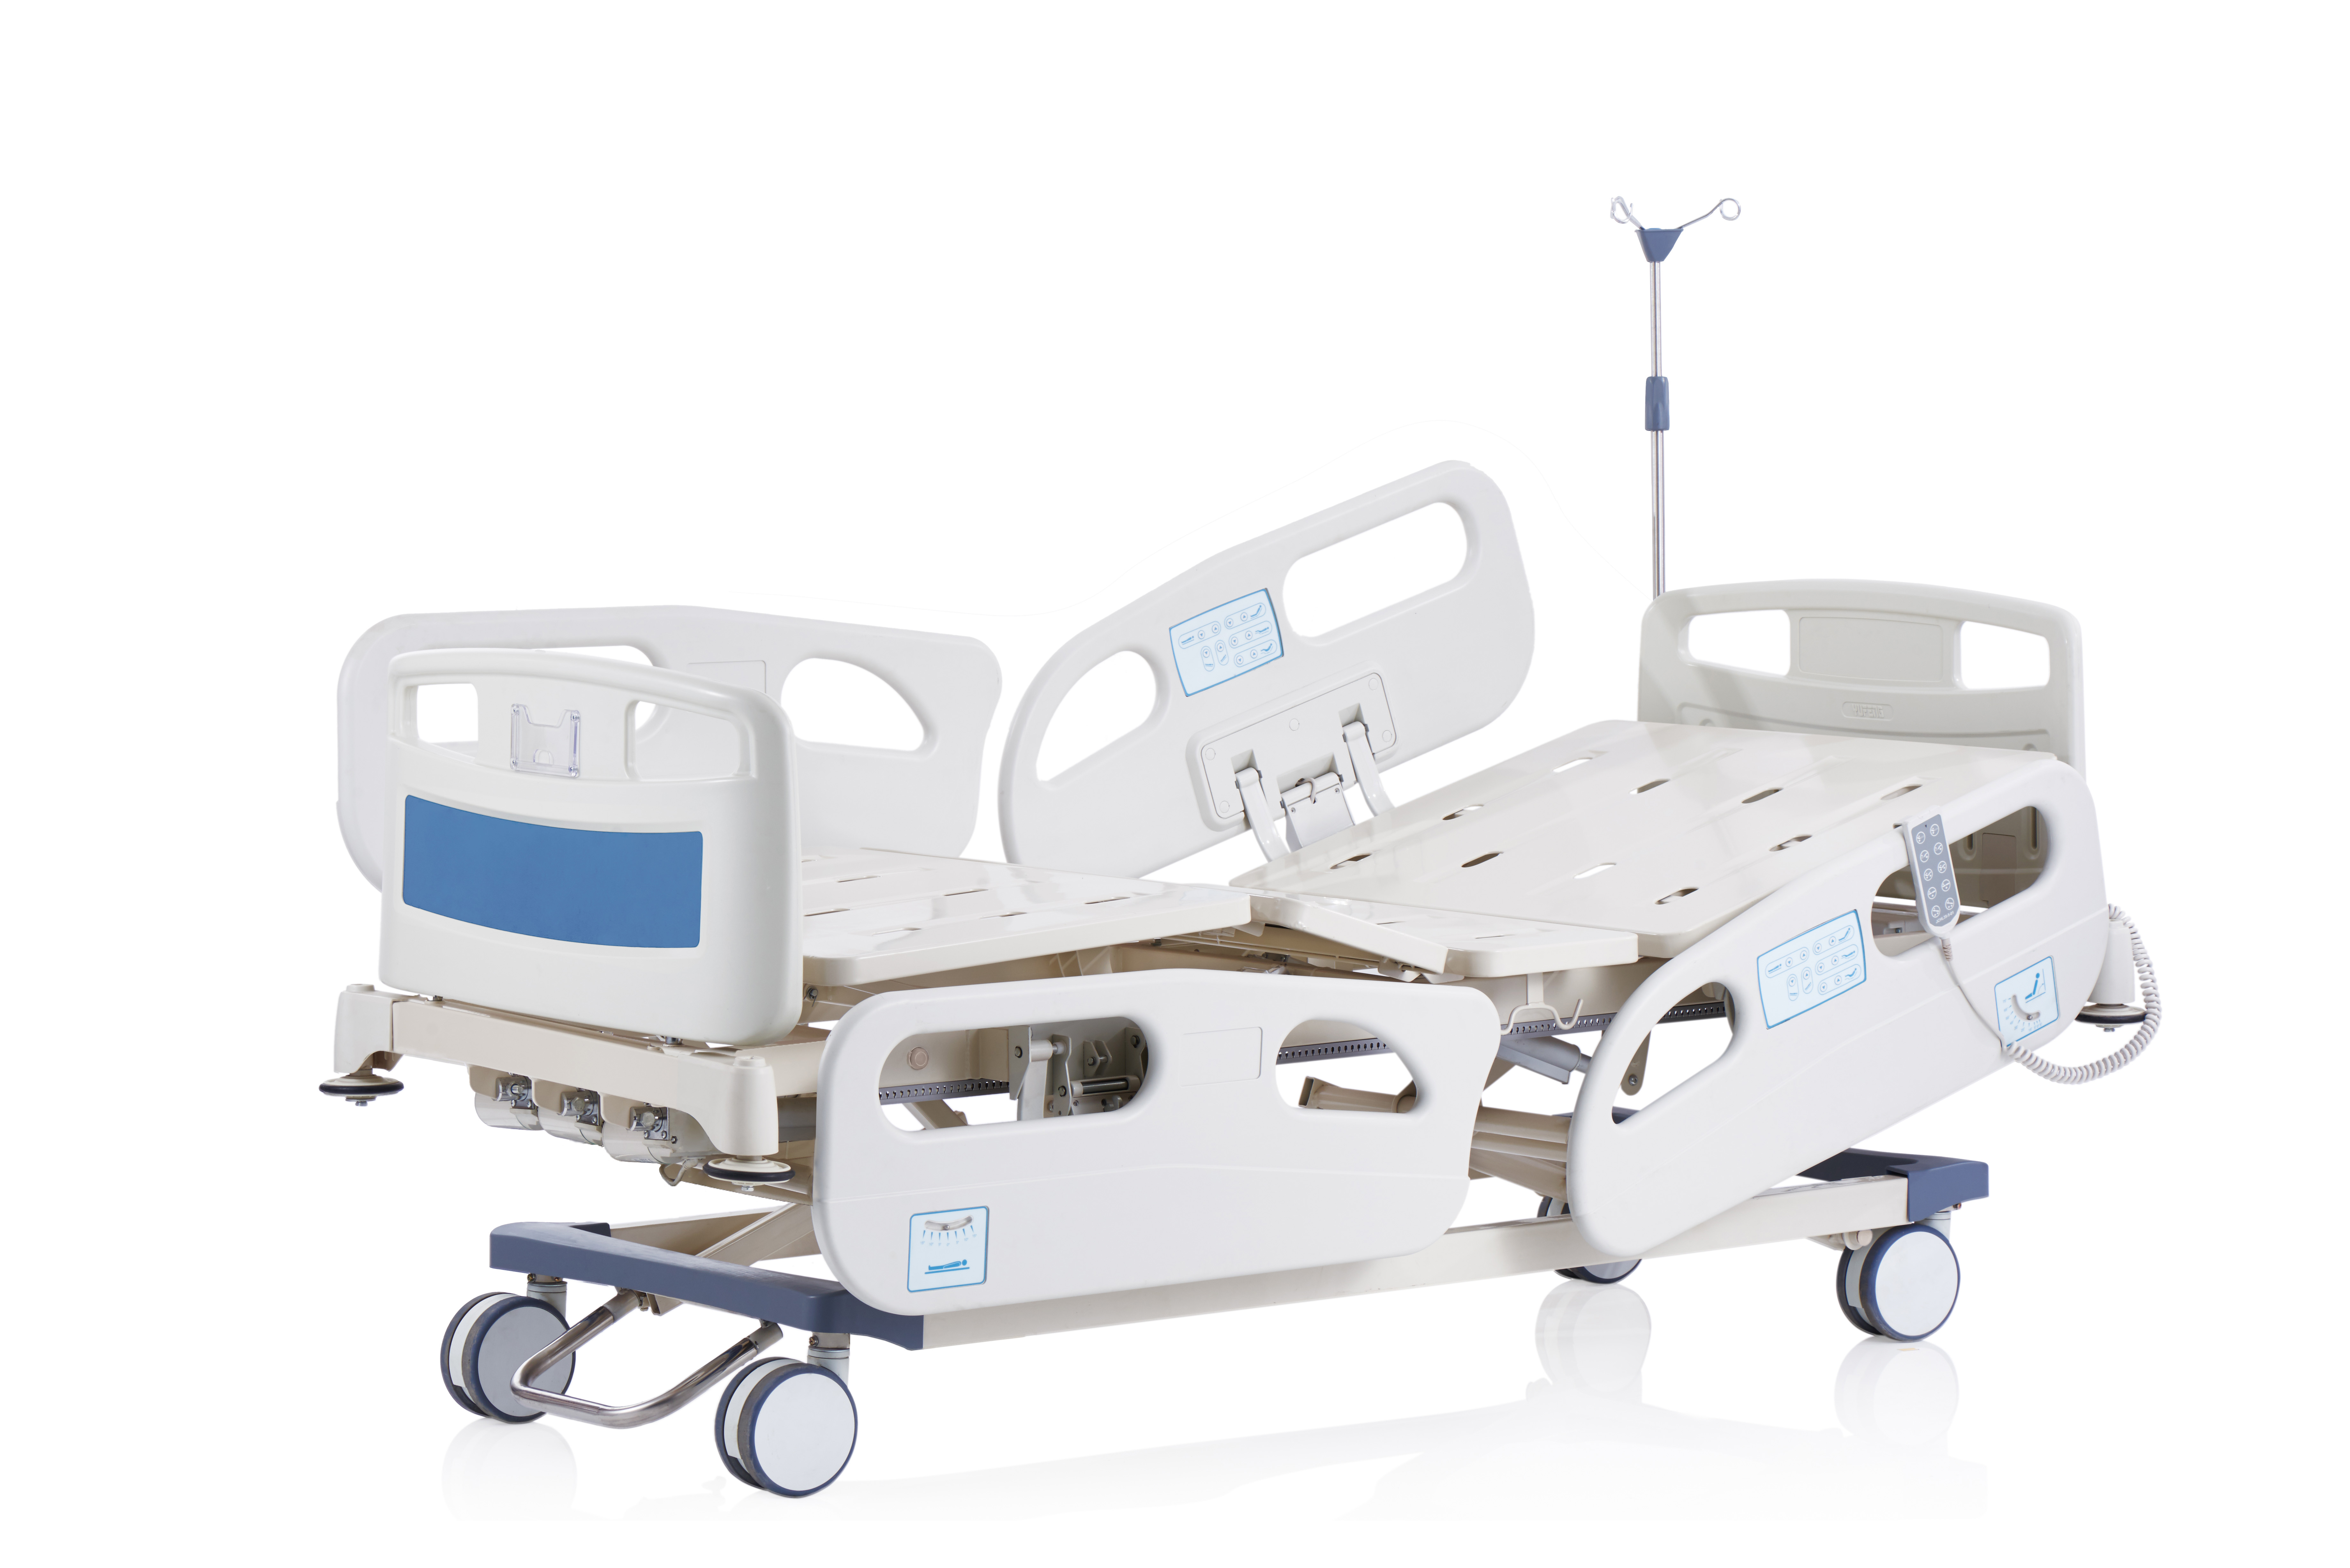 2021 High quality Five Functions Electric Hospital Bed - E5704 folding medical electric hospital ICU bed Patient nursing bed – Chinabase